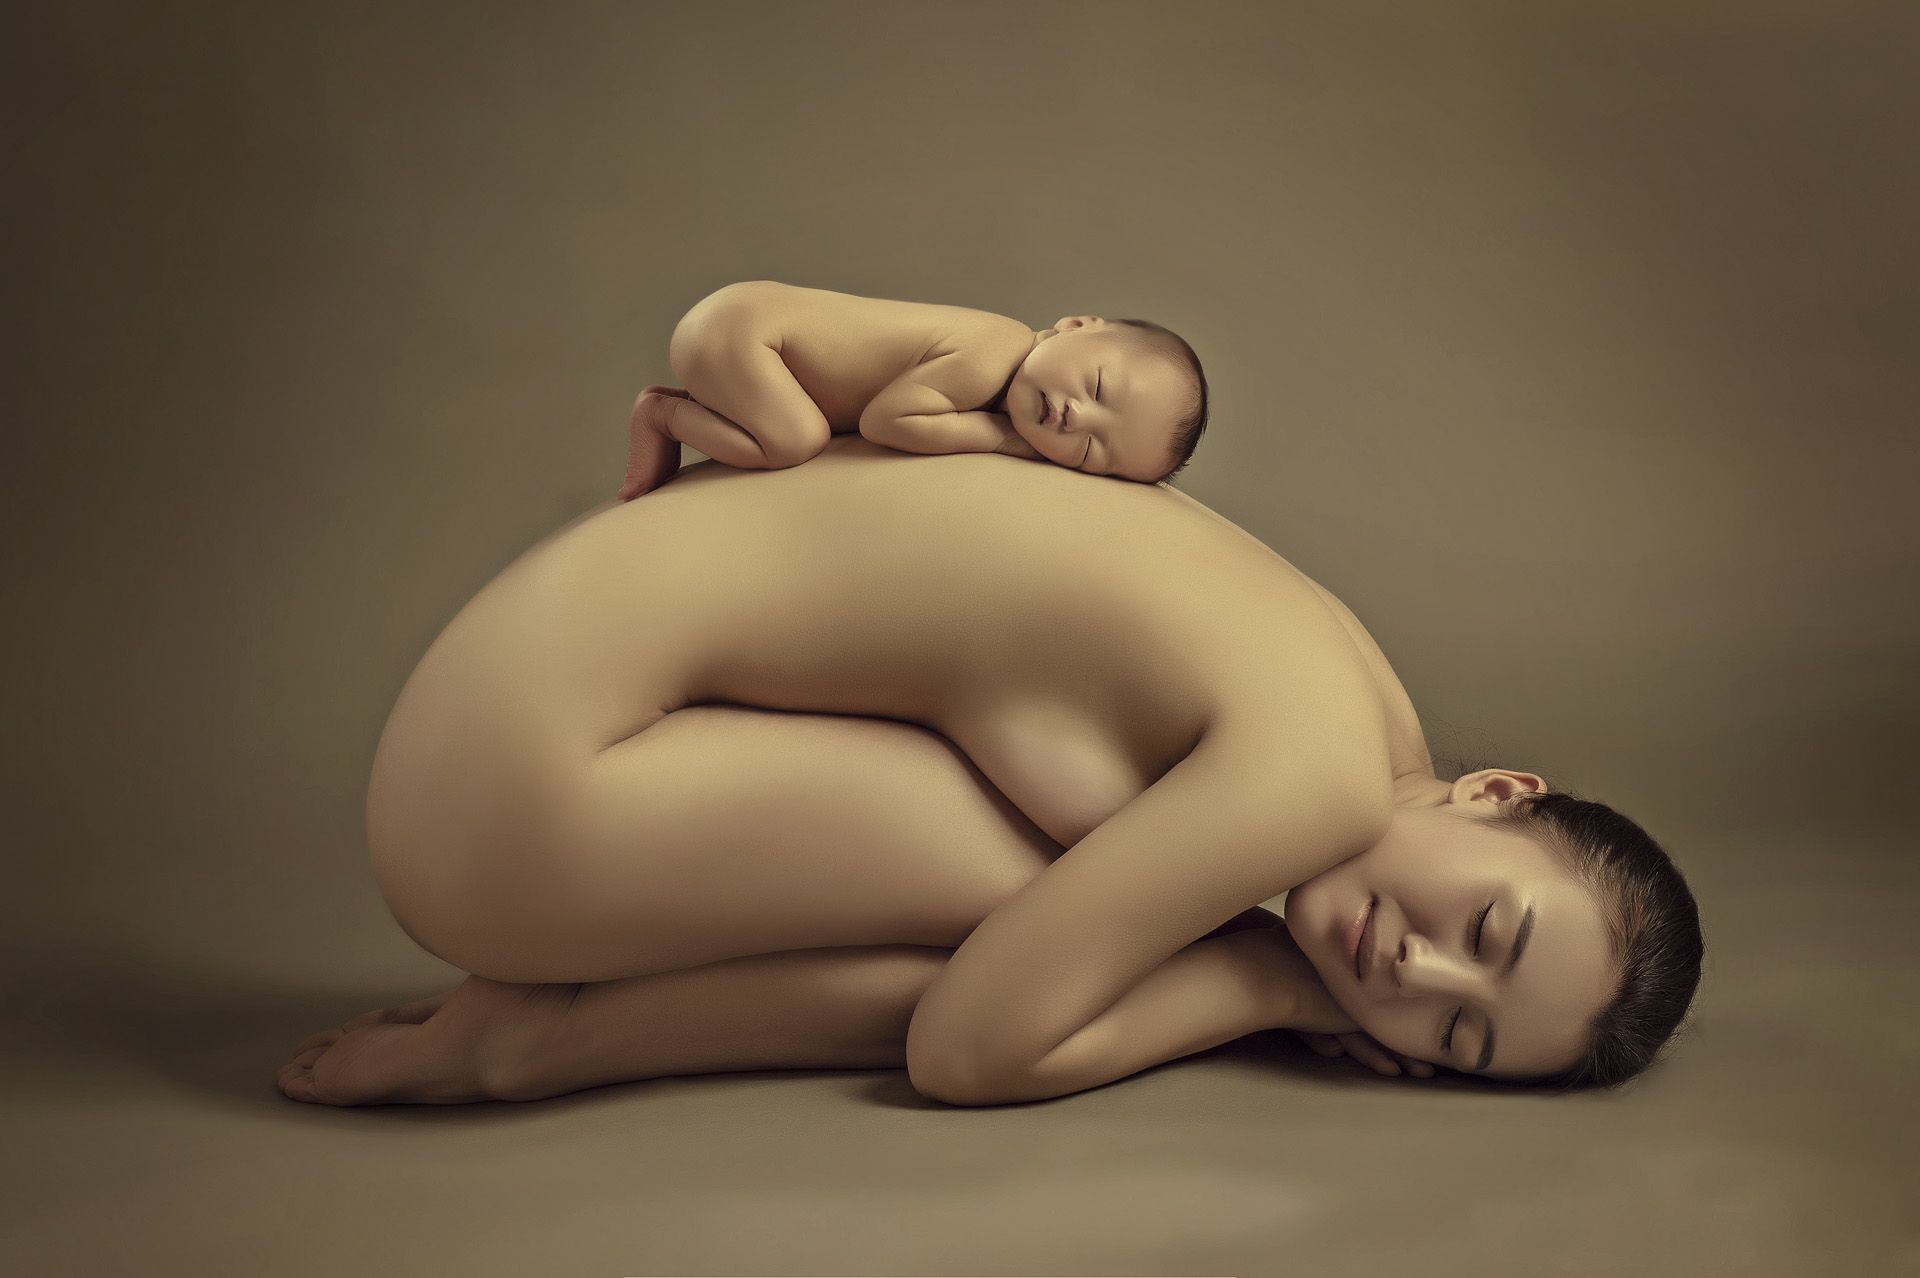 Autor: Jiming Lv. Ttulo: Mother and son.